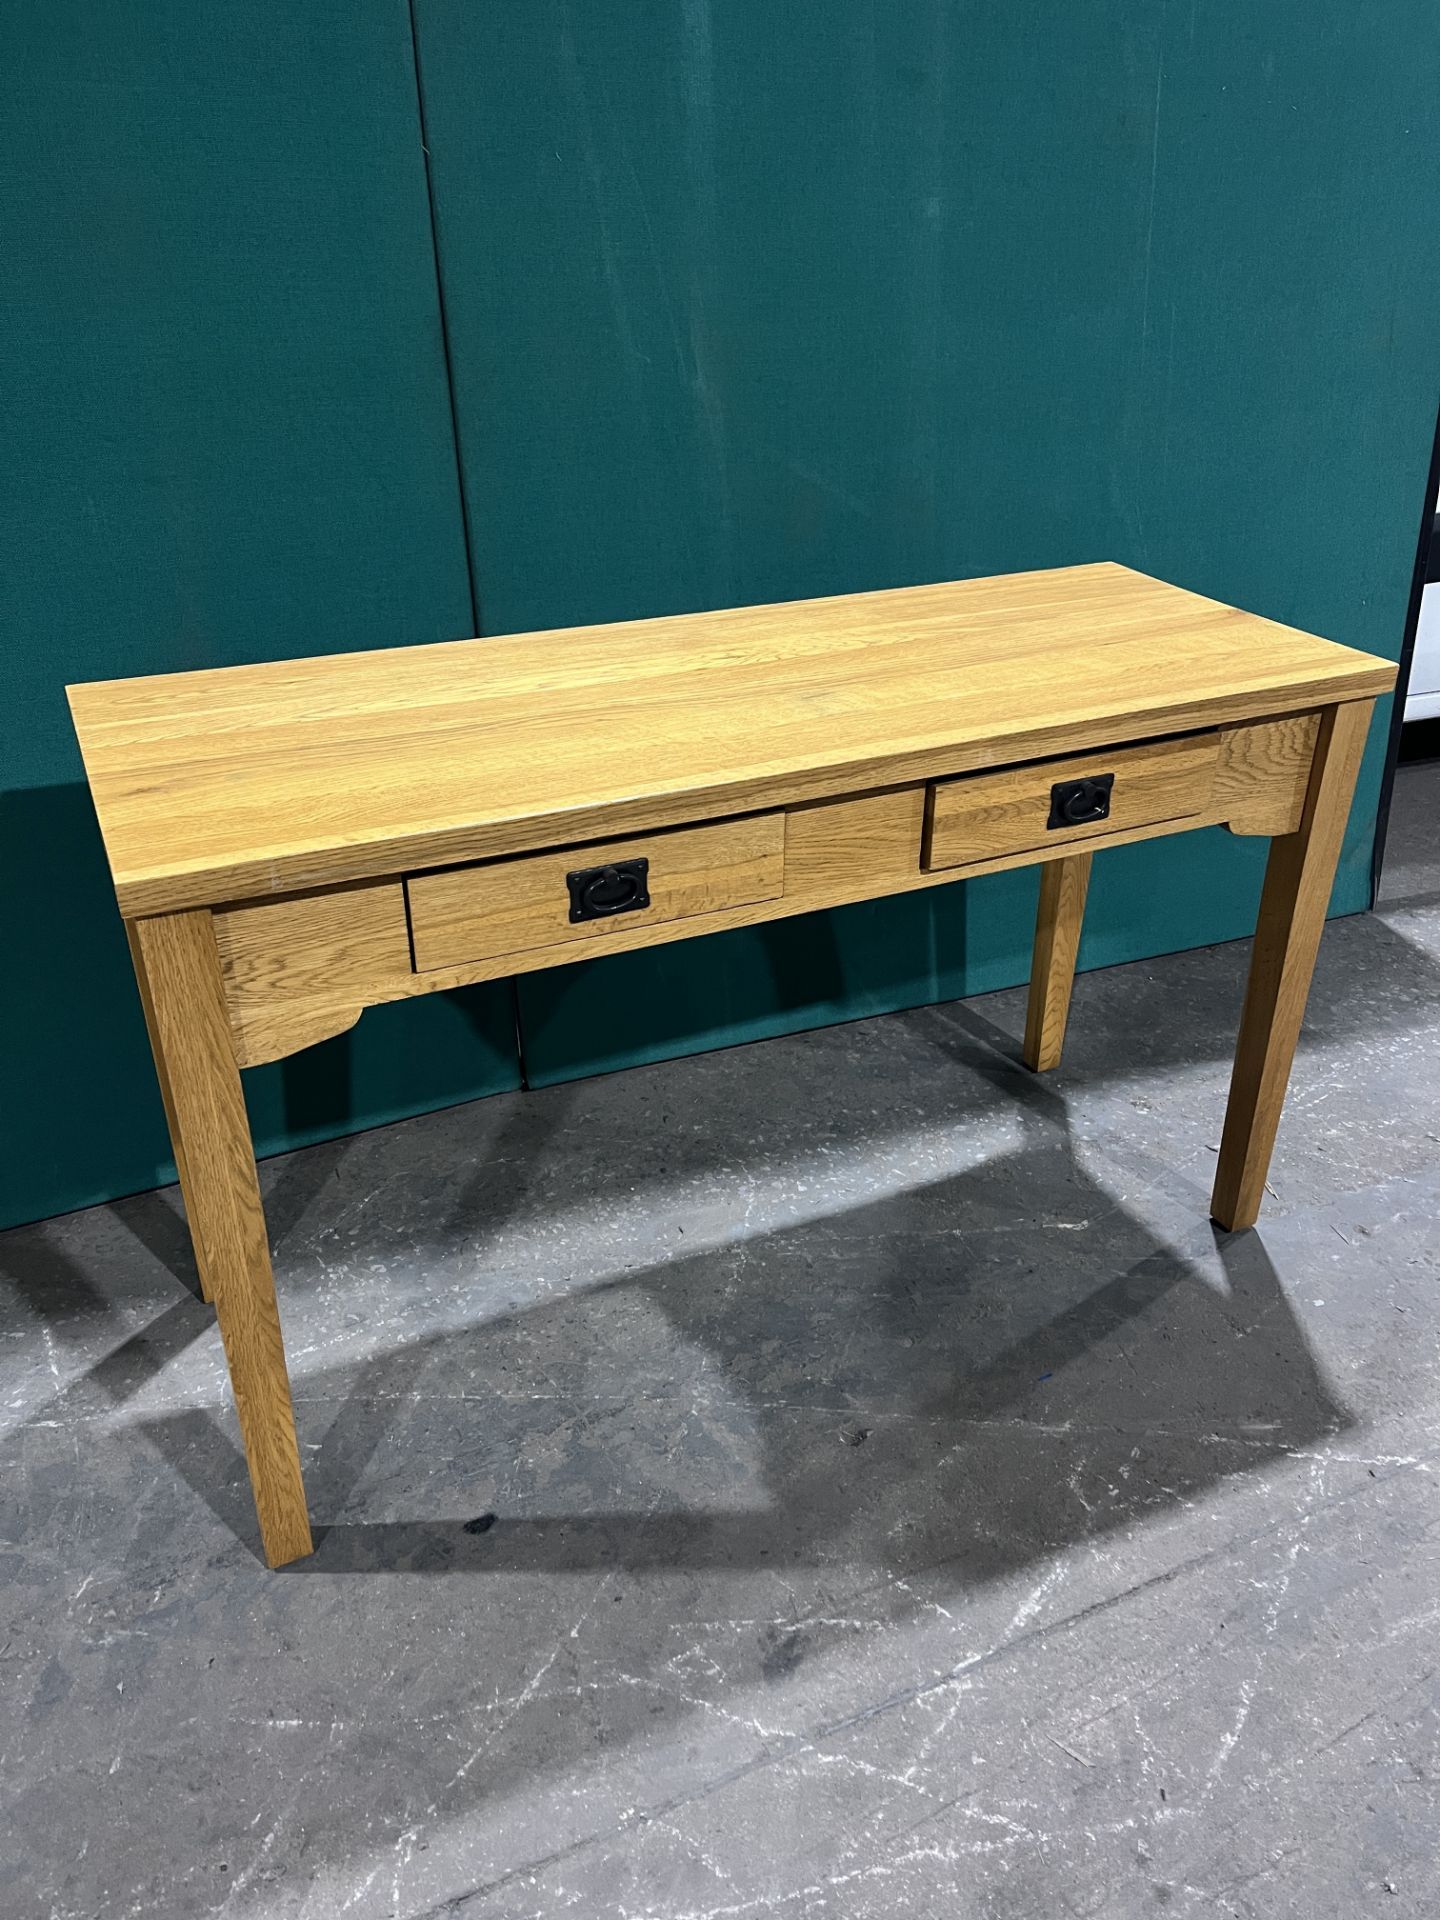 Oak Console Table w 2 Drawers - Image 3 of 4